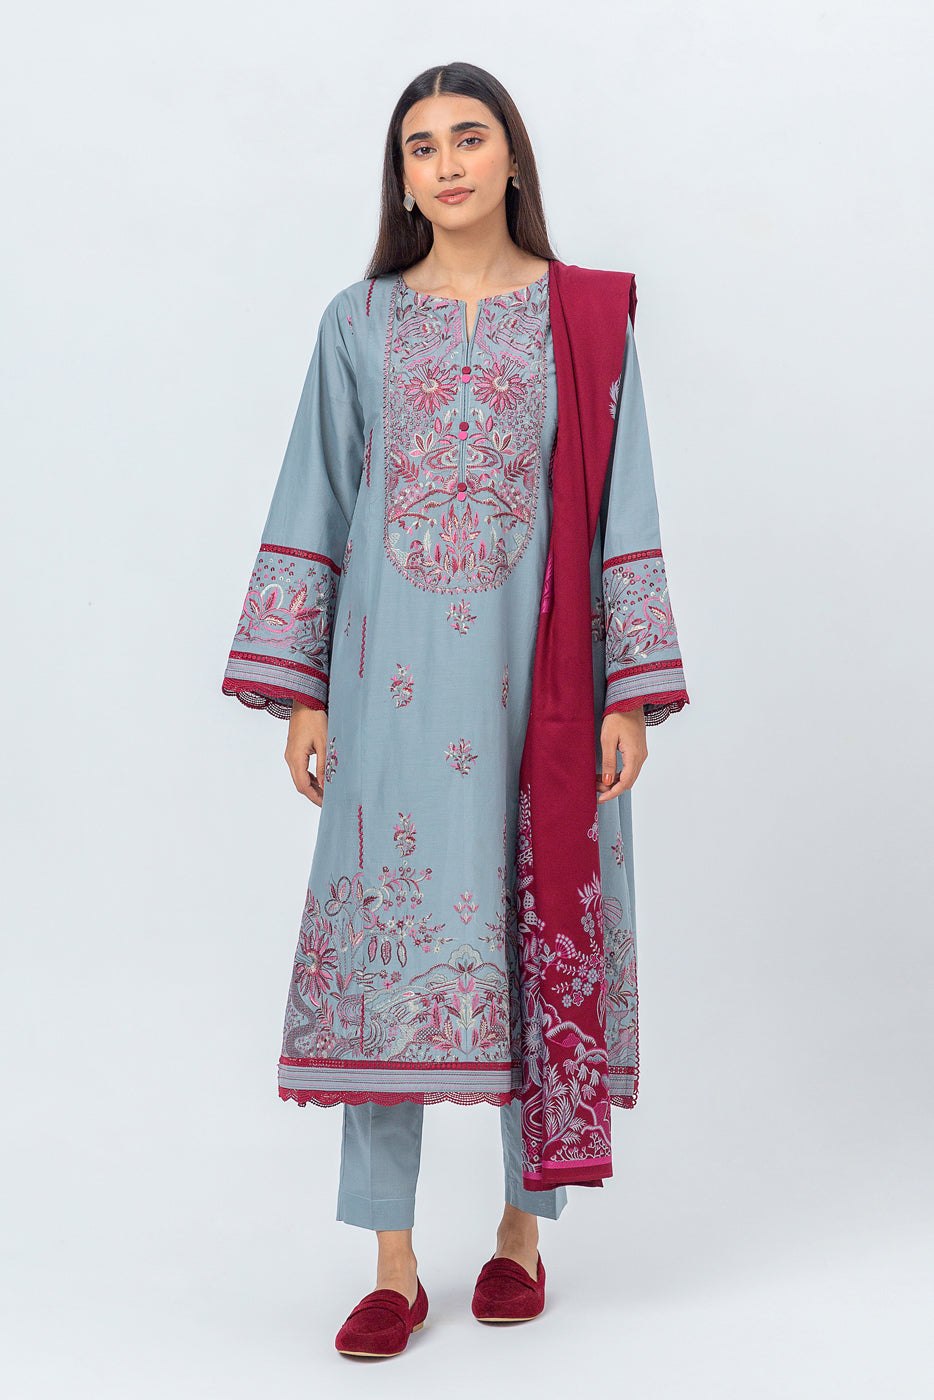 3 PIECE - EMBROIDERED CAMBRIC SUIT WITH WOVEN SHAWL - DIVINITY DREAM (UNSTITCHED) - BEECHTREE